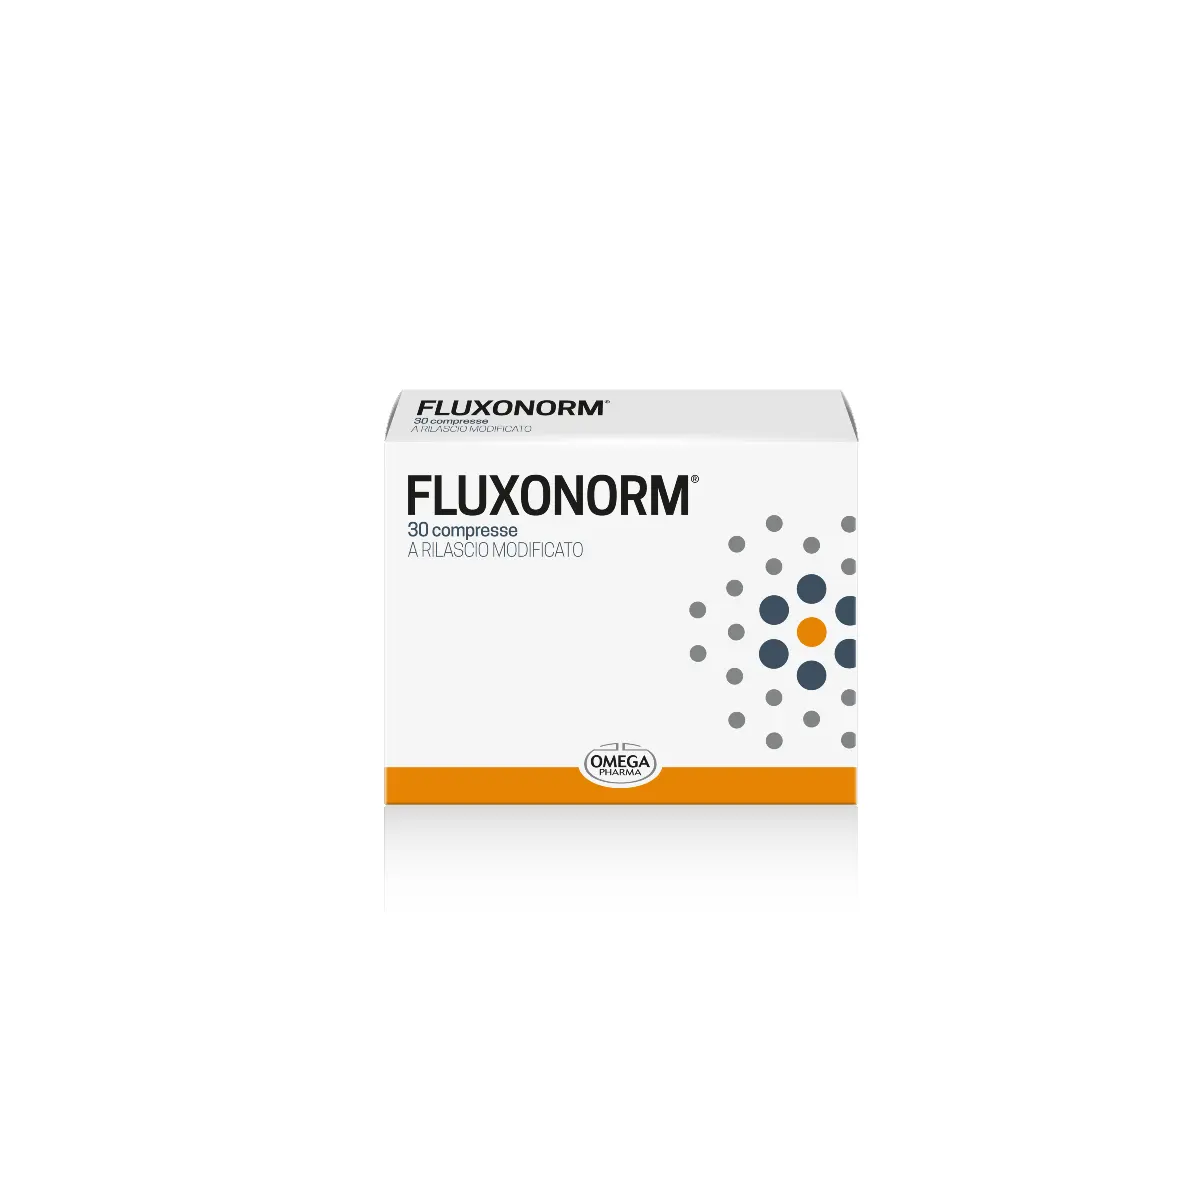 Made in Italy food supplement  FLUXONORM tablets  urge incontinence  menopause  urinary tract  prostatitis